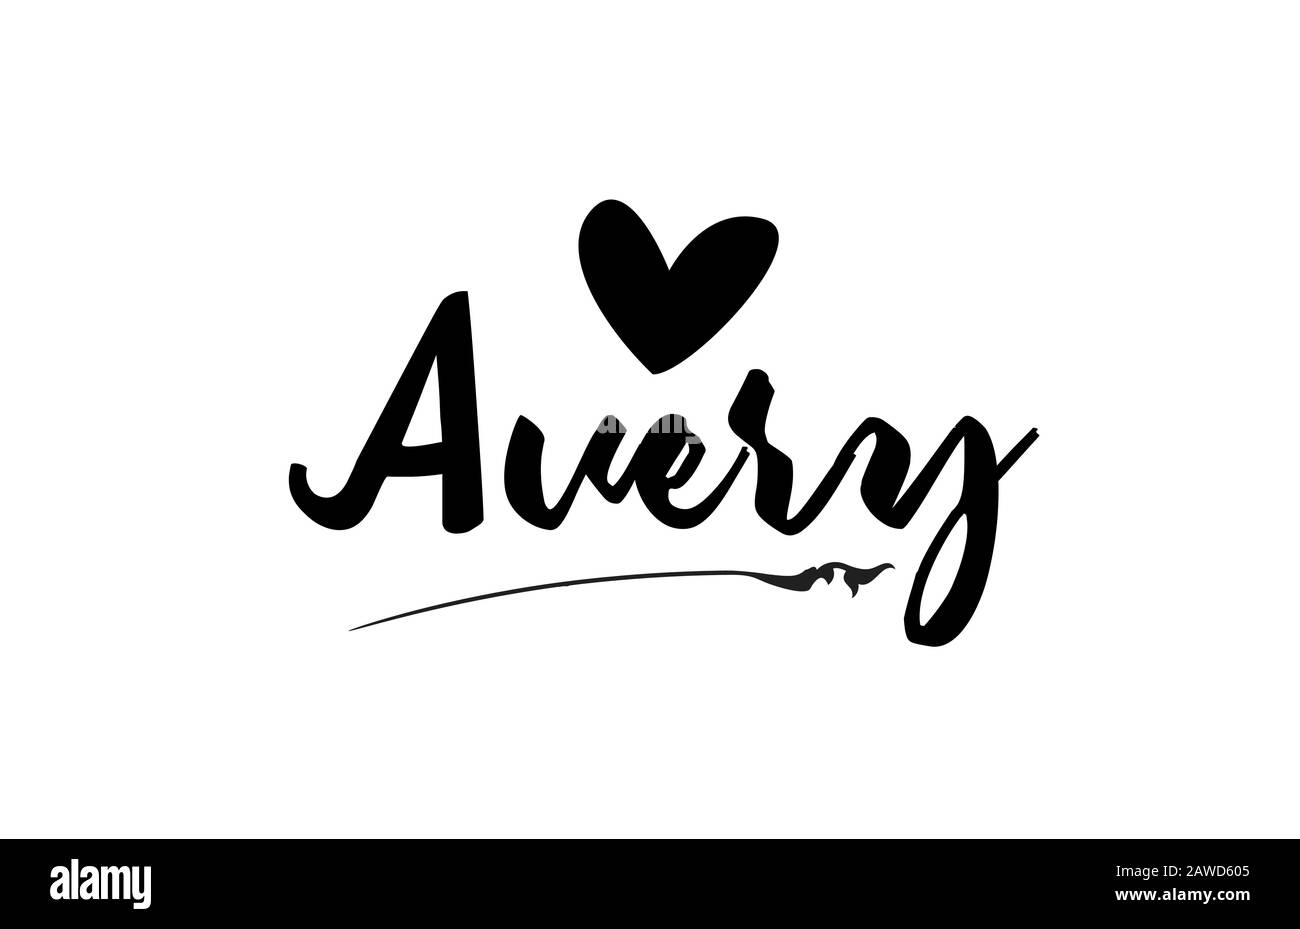 Avery name design Stock Vector Images - Alamy